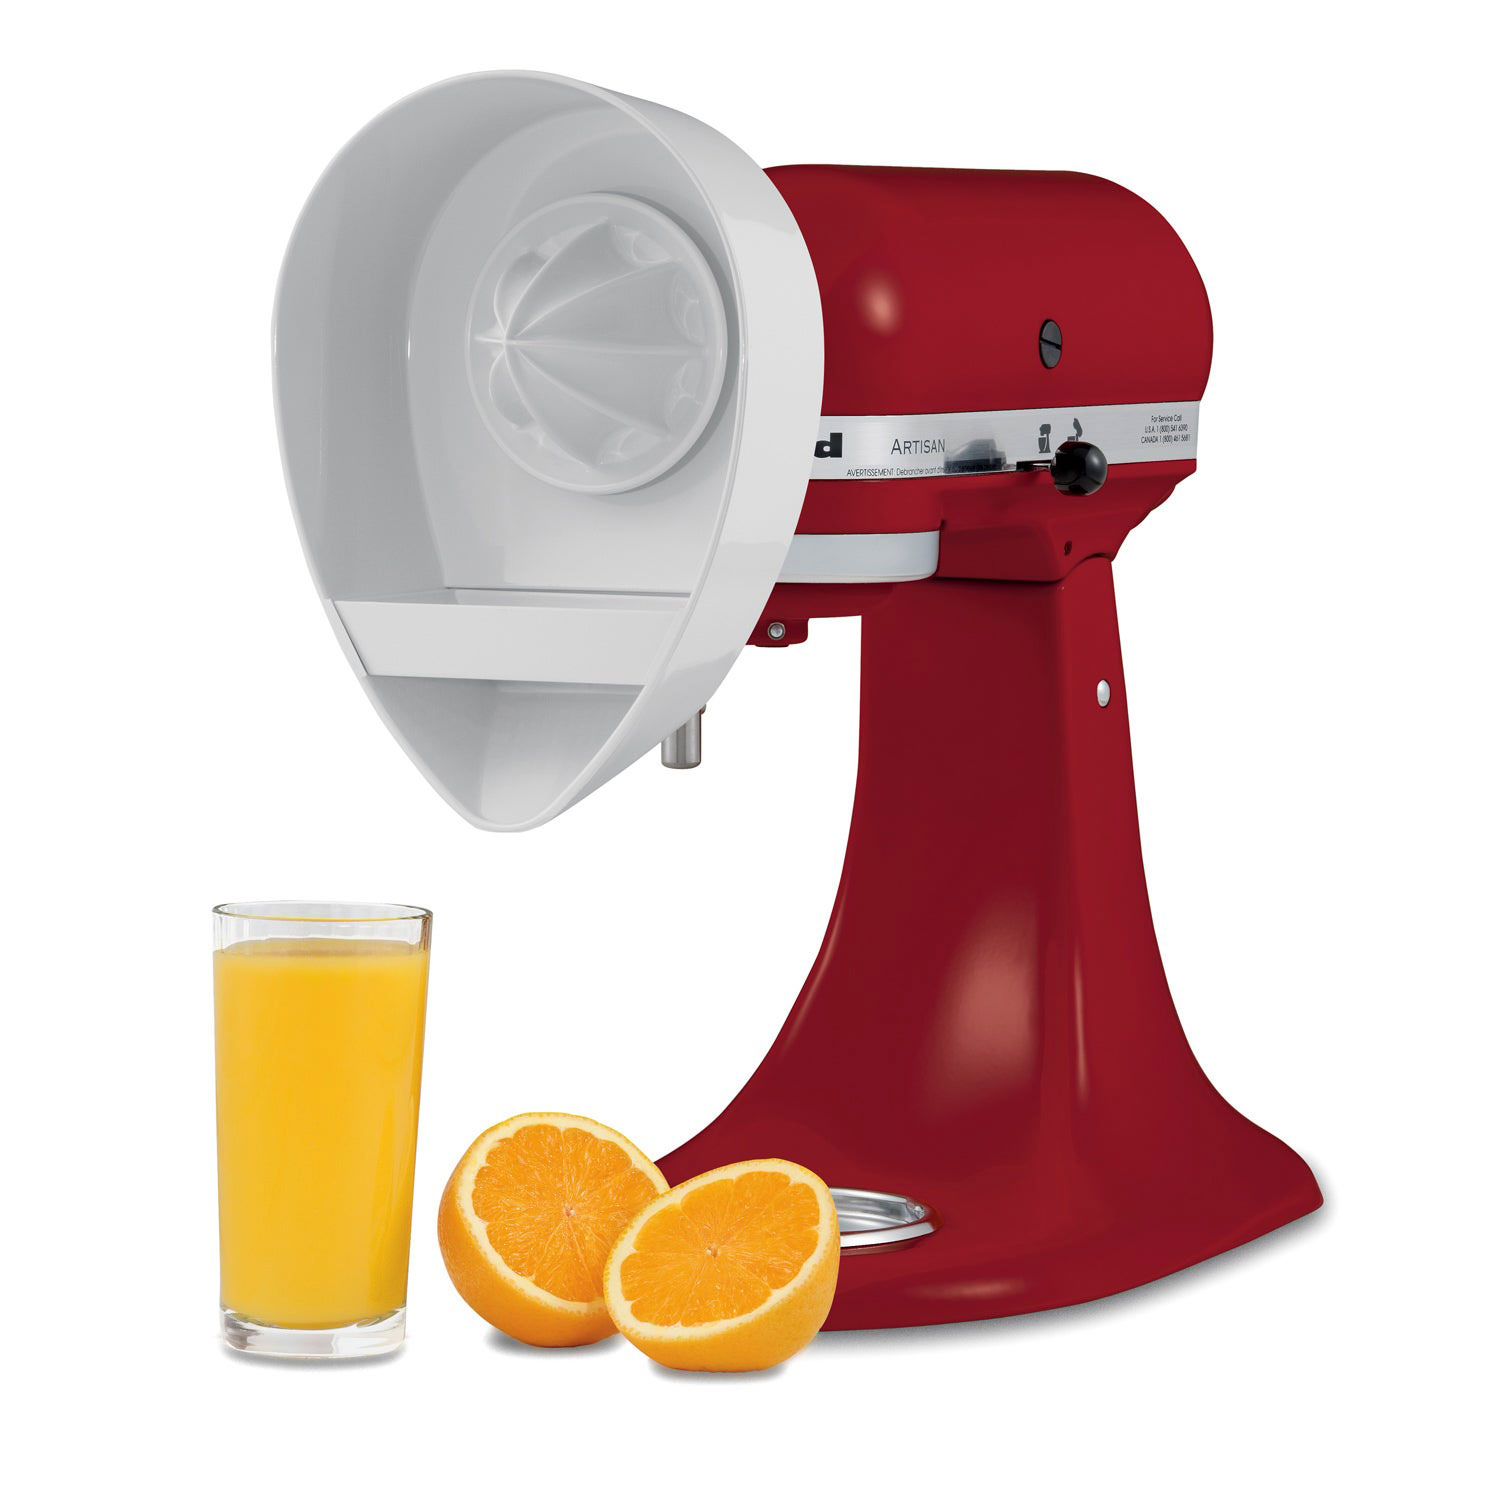 Kitchenaid Citrus Juicer Attachment - Easy-to-use Juicer For Fresh